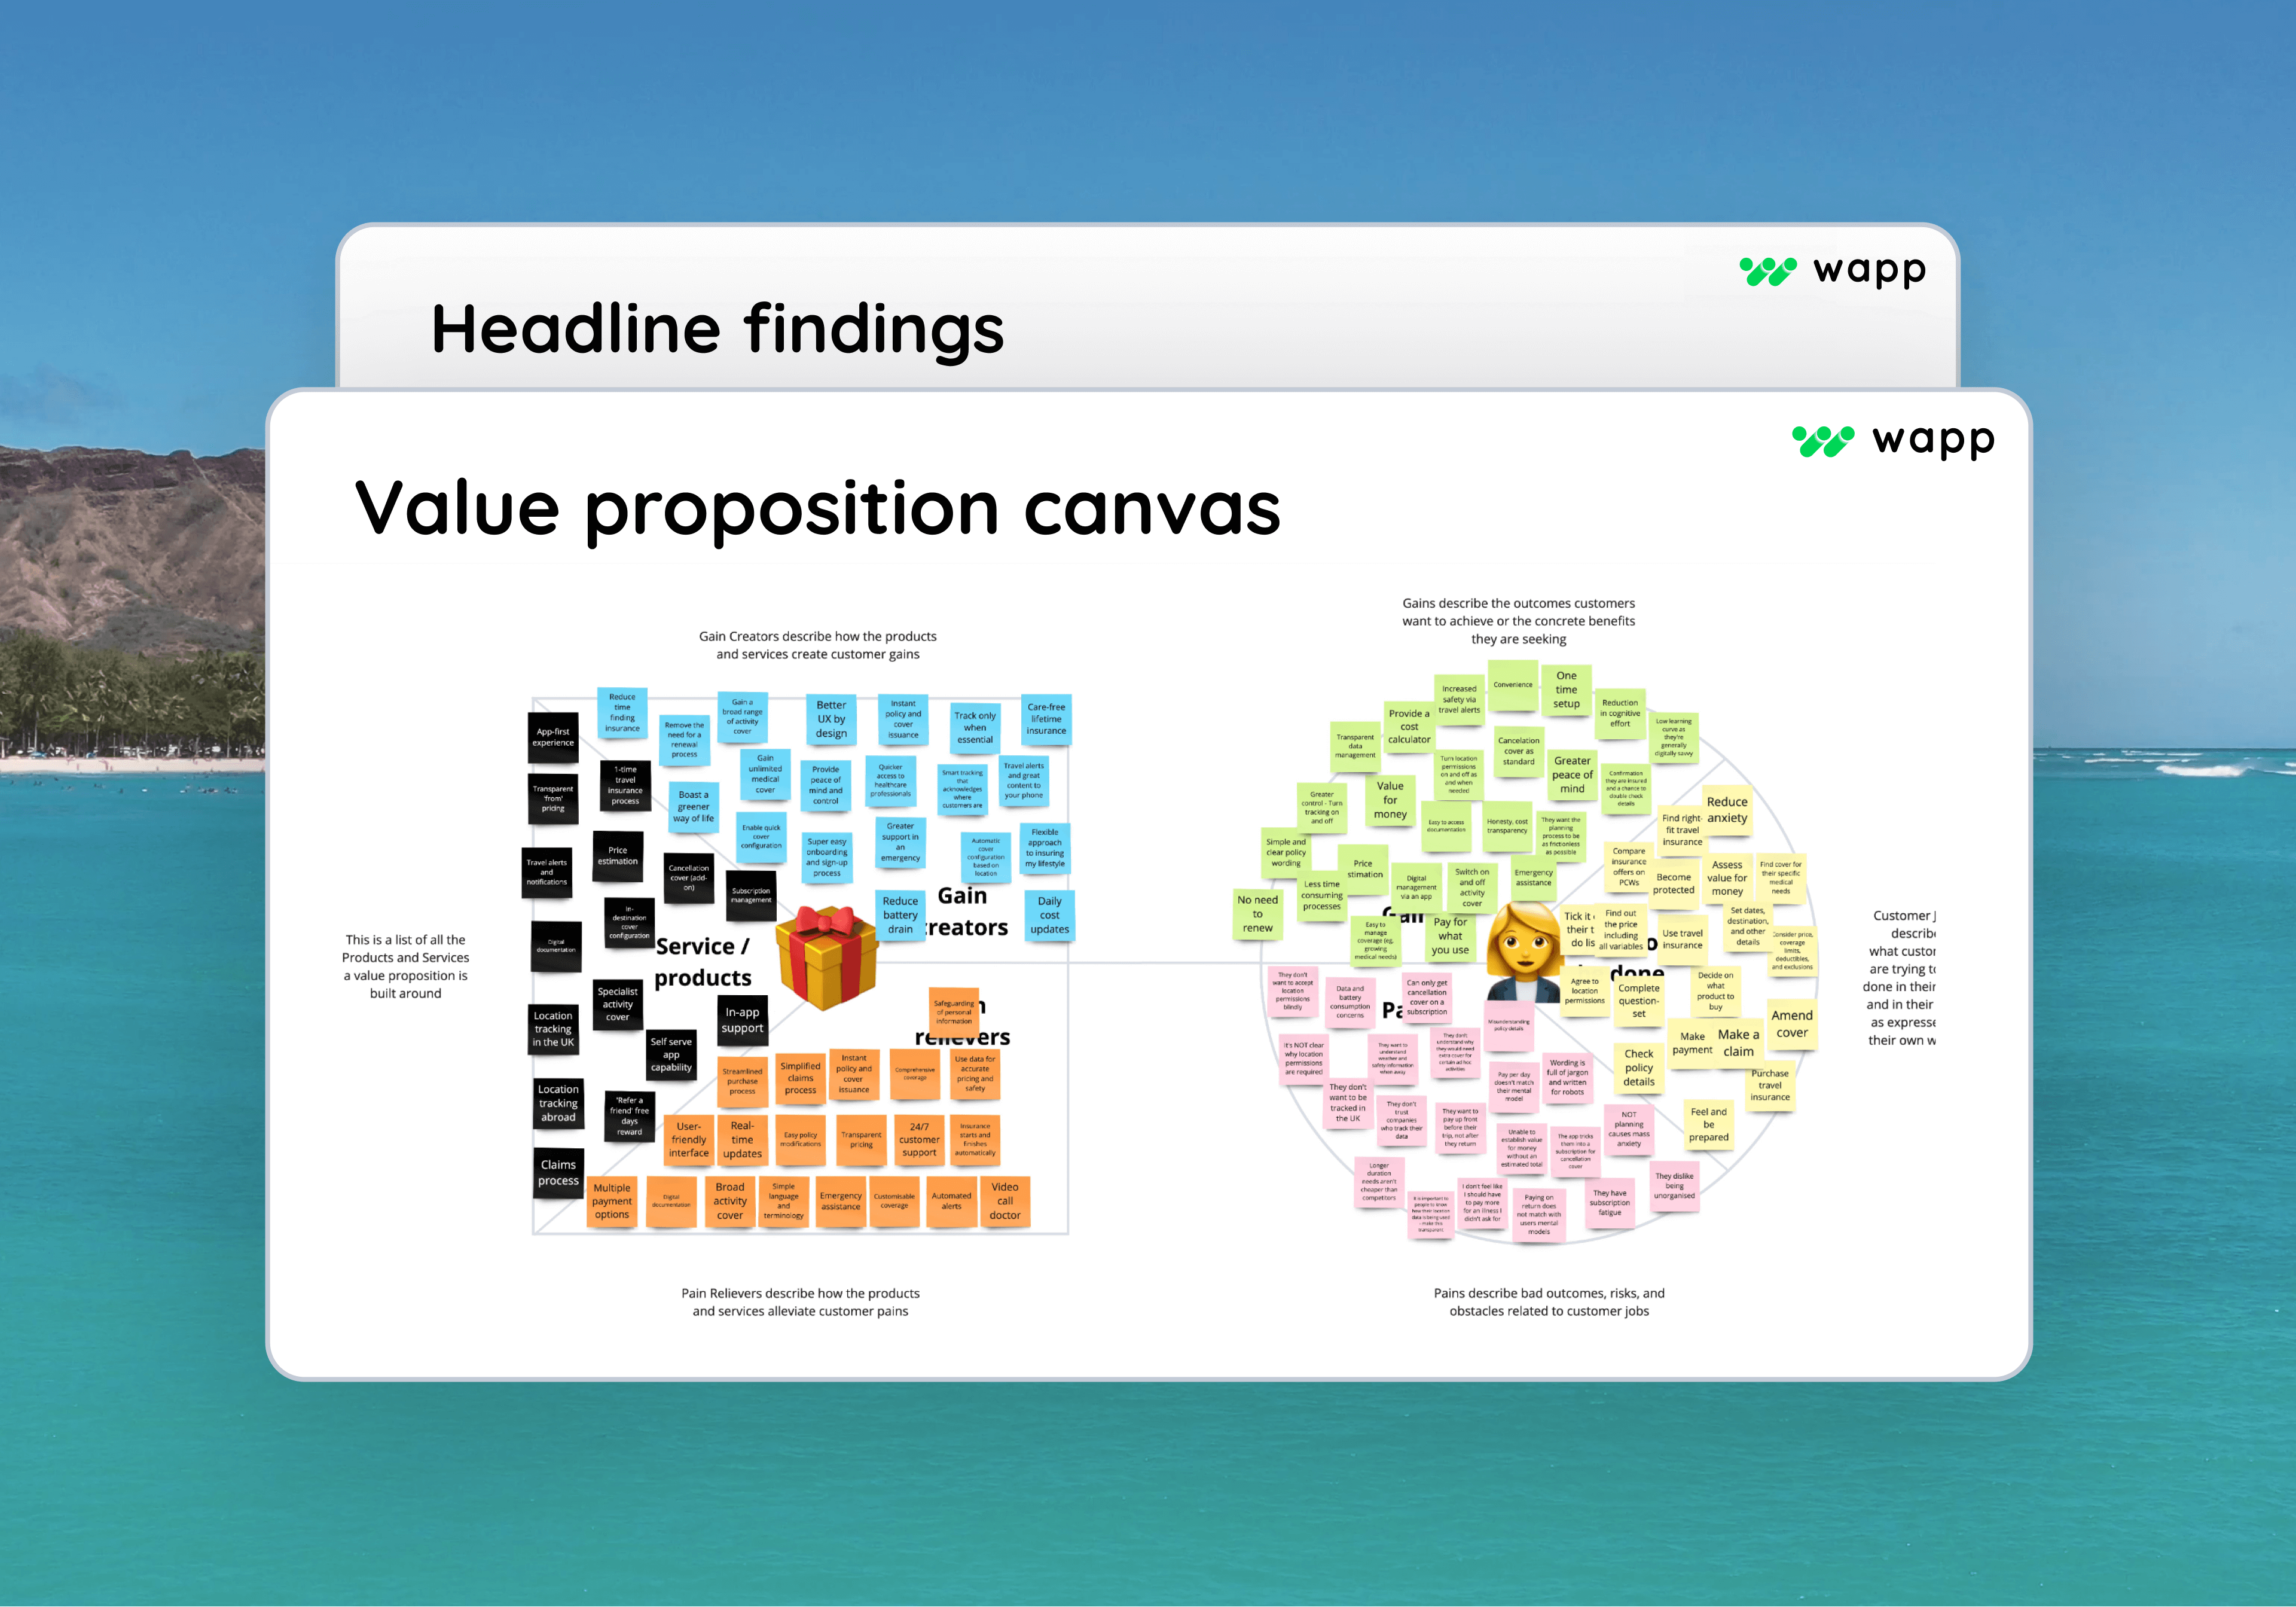 Our proposition validation process helped us create a value proposition canvas for Wapp